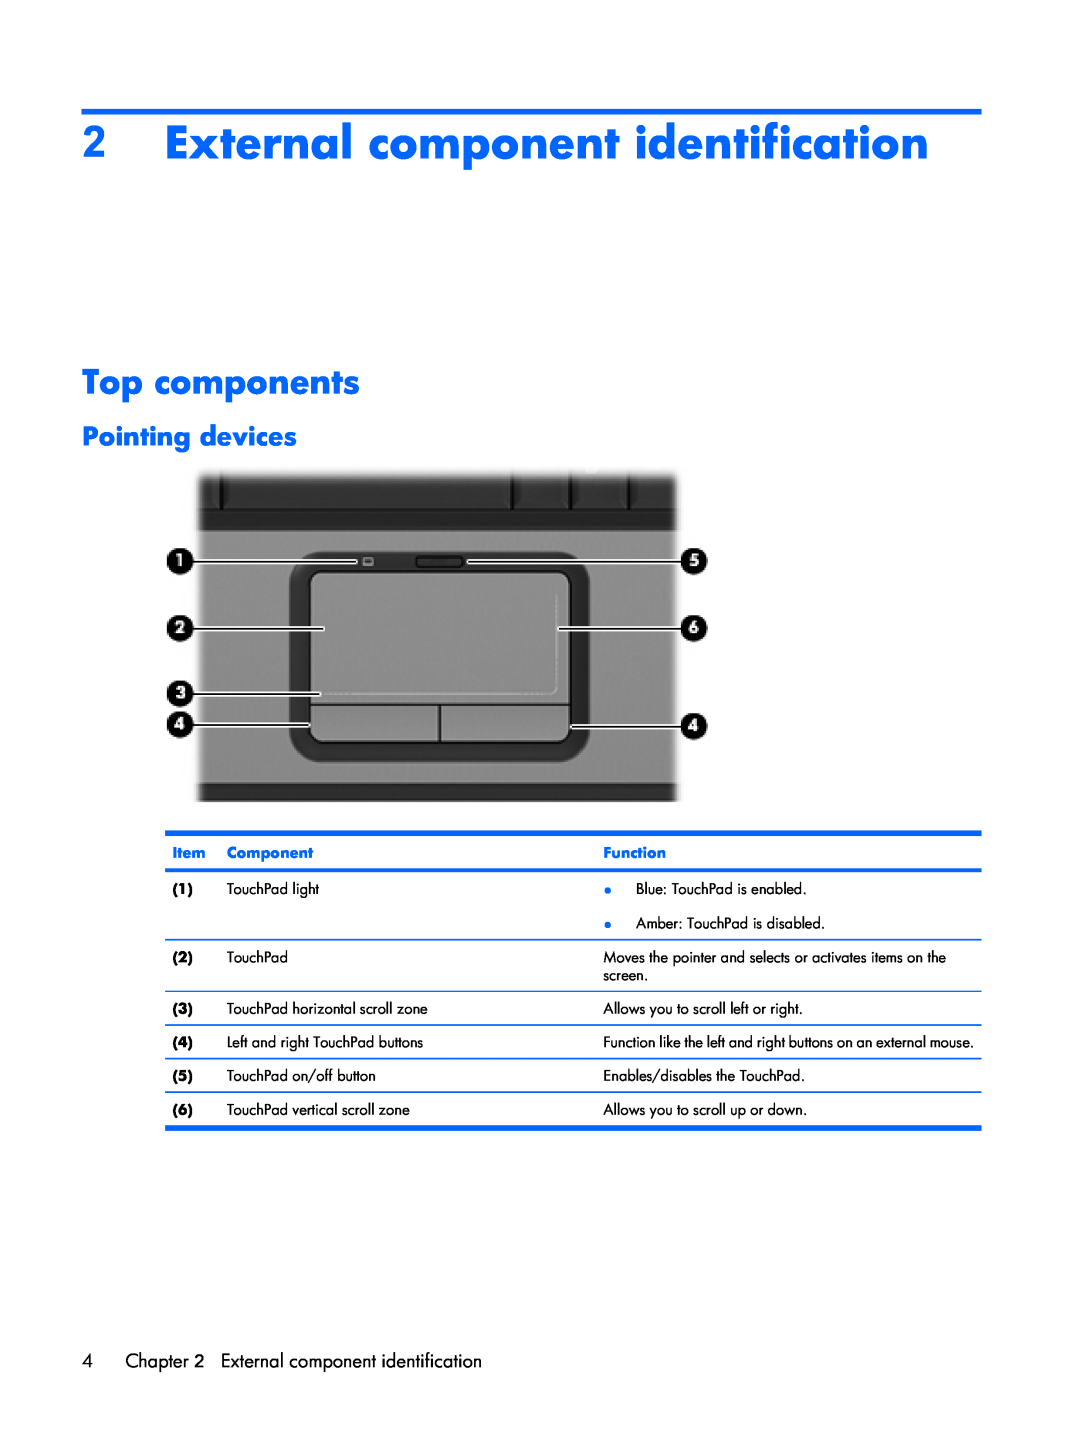 Compaq F500 manual External component identification, Top components, Pointing devices, Component, Function 